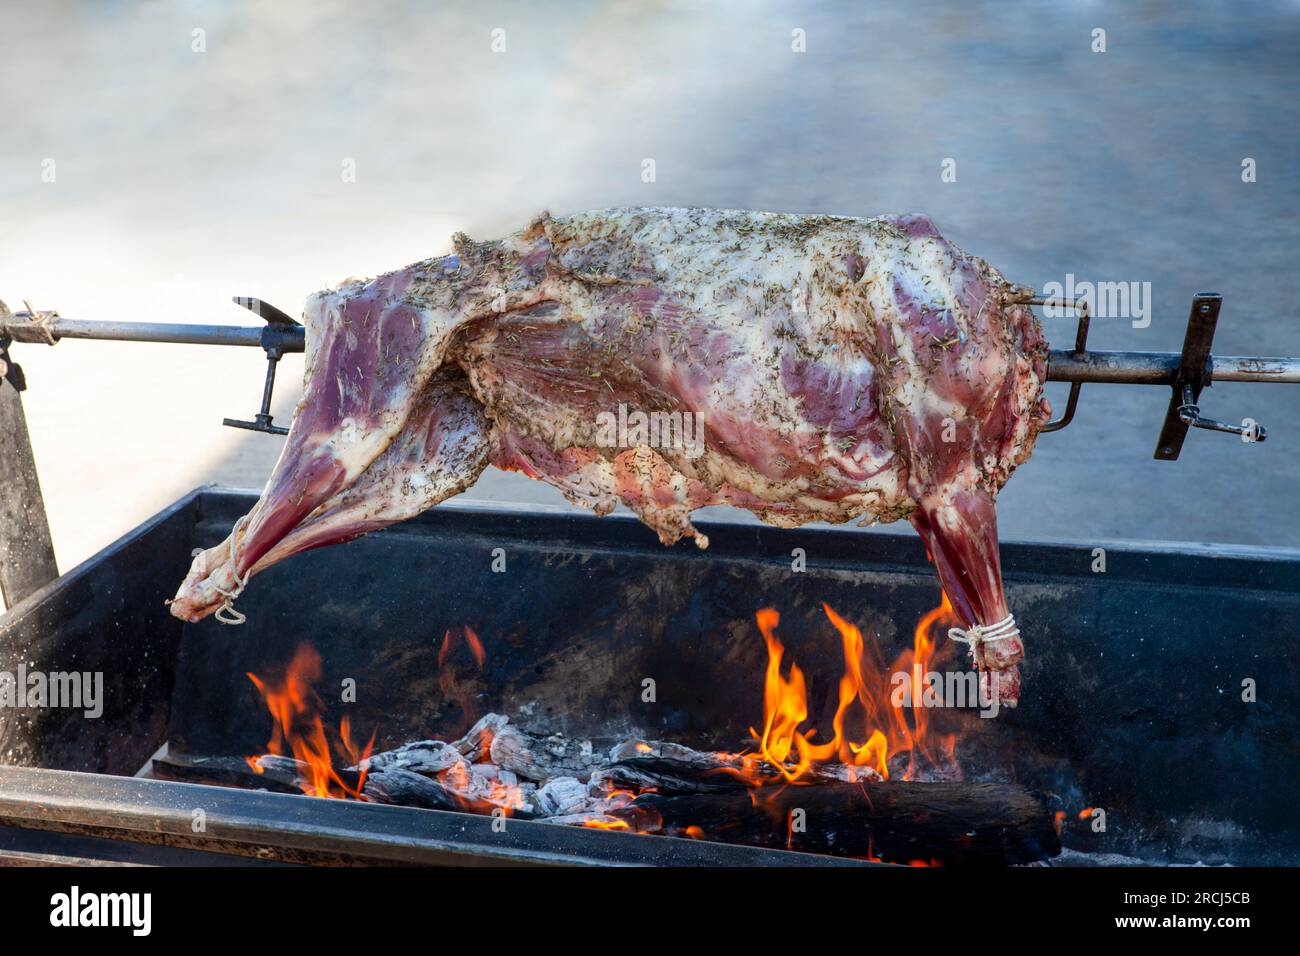 traditional spit barbeque in the backyard with a lamb sprinkled with herbs above the charcoal Stock Photo